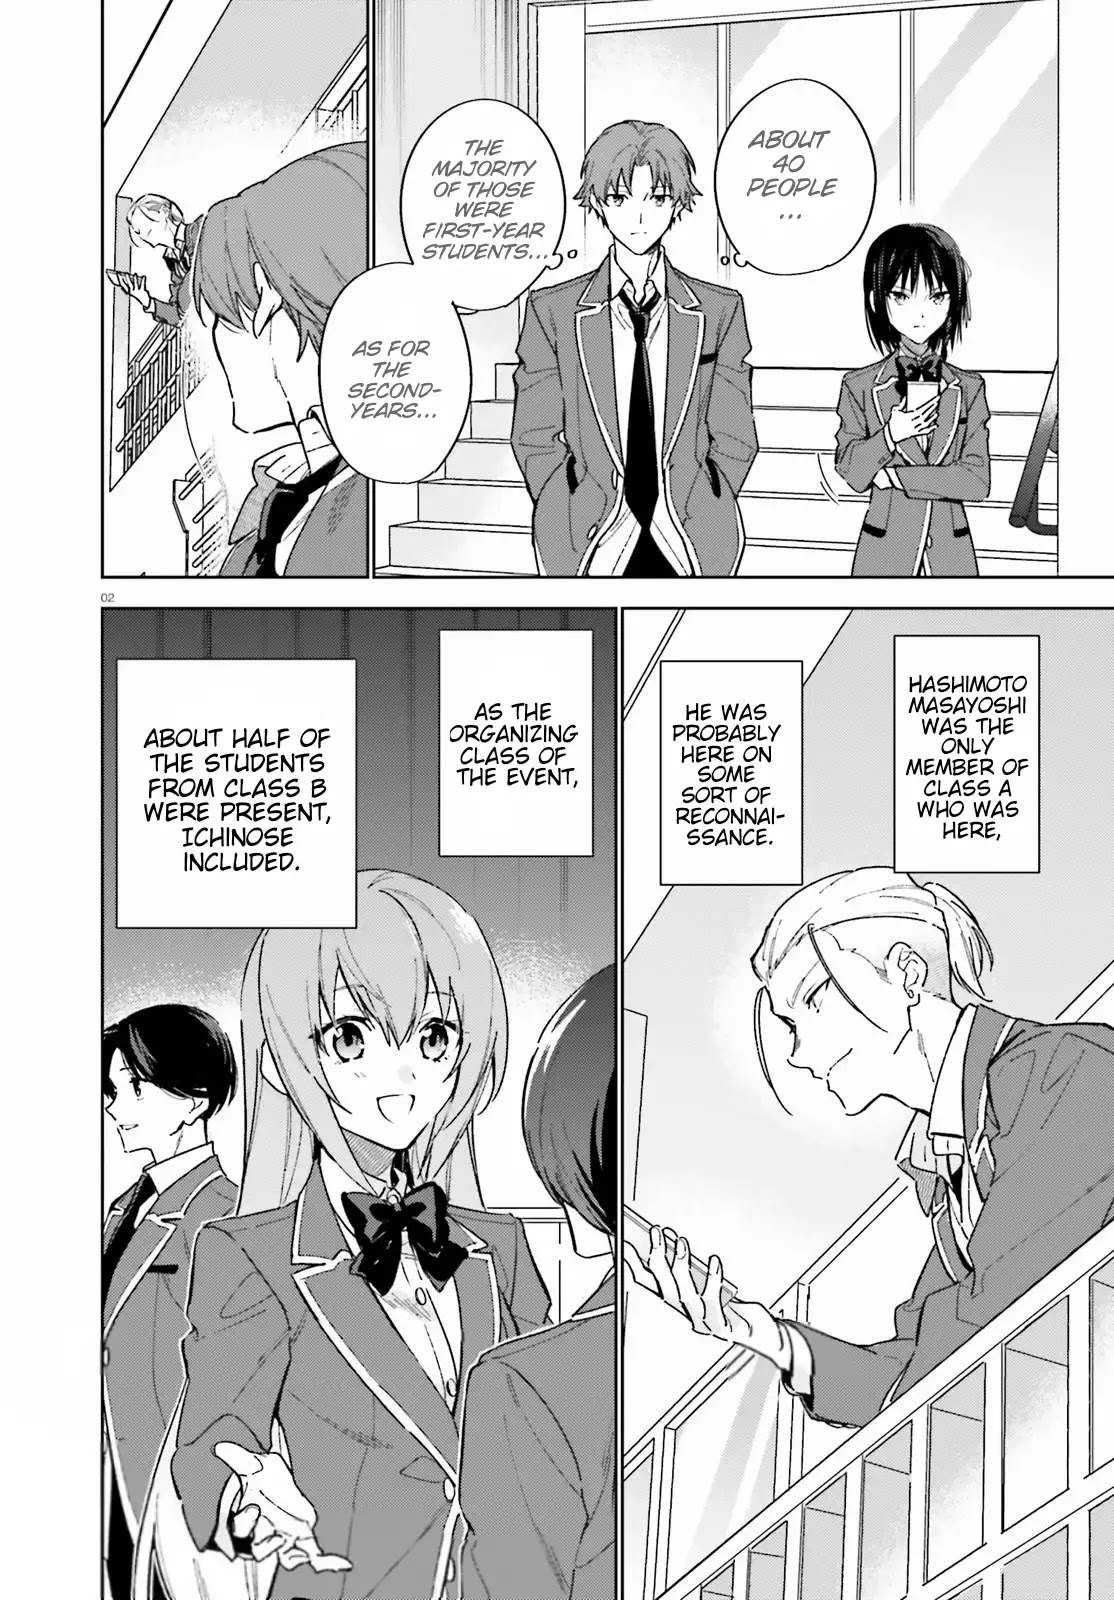 Classroom of the Elite – 2nd Year, Chapter 2 - Classroom of the Elite Manga  Online